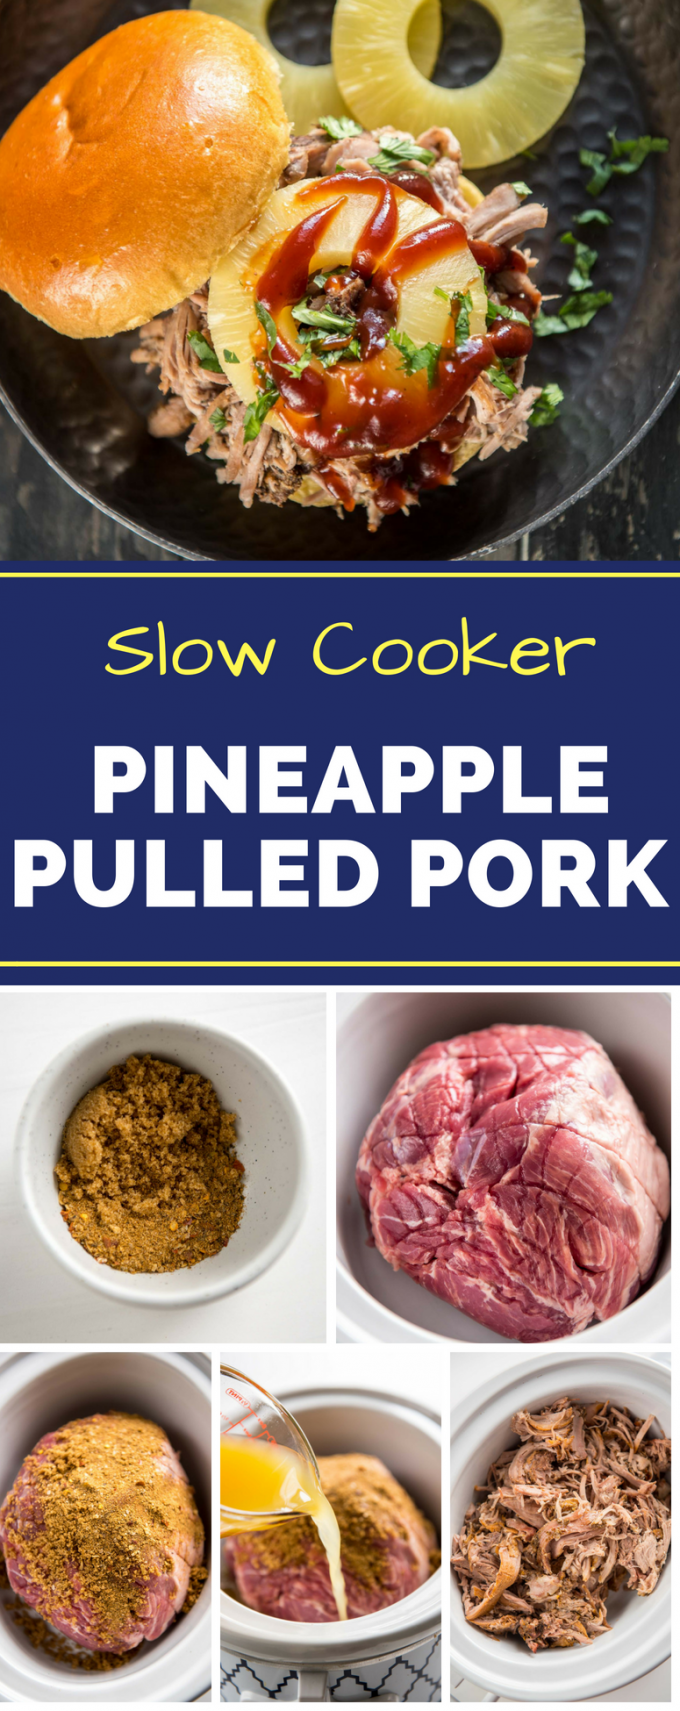 This Slow Cooker Pineapple Pulled Pork recipe is perfect for any summer BBQ! Piled high with barbecue sauce an a slice of pineapple, it makes great tacos or even sliders! Utilize your crockpot to make cooking easy this summer. #pineapplepulledpork #slowcookerrecipes #easycrockpotrecipes #gogogogourmet via @gogogogourmet